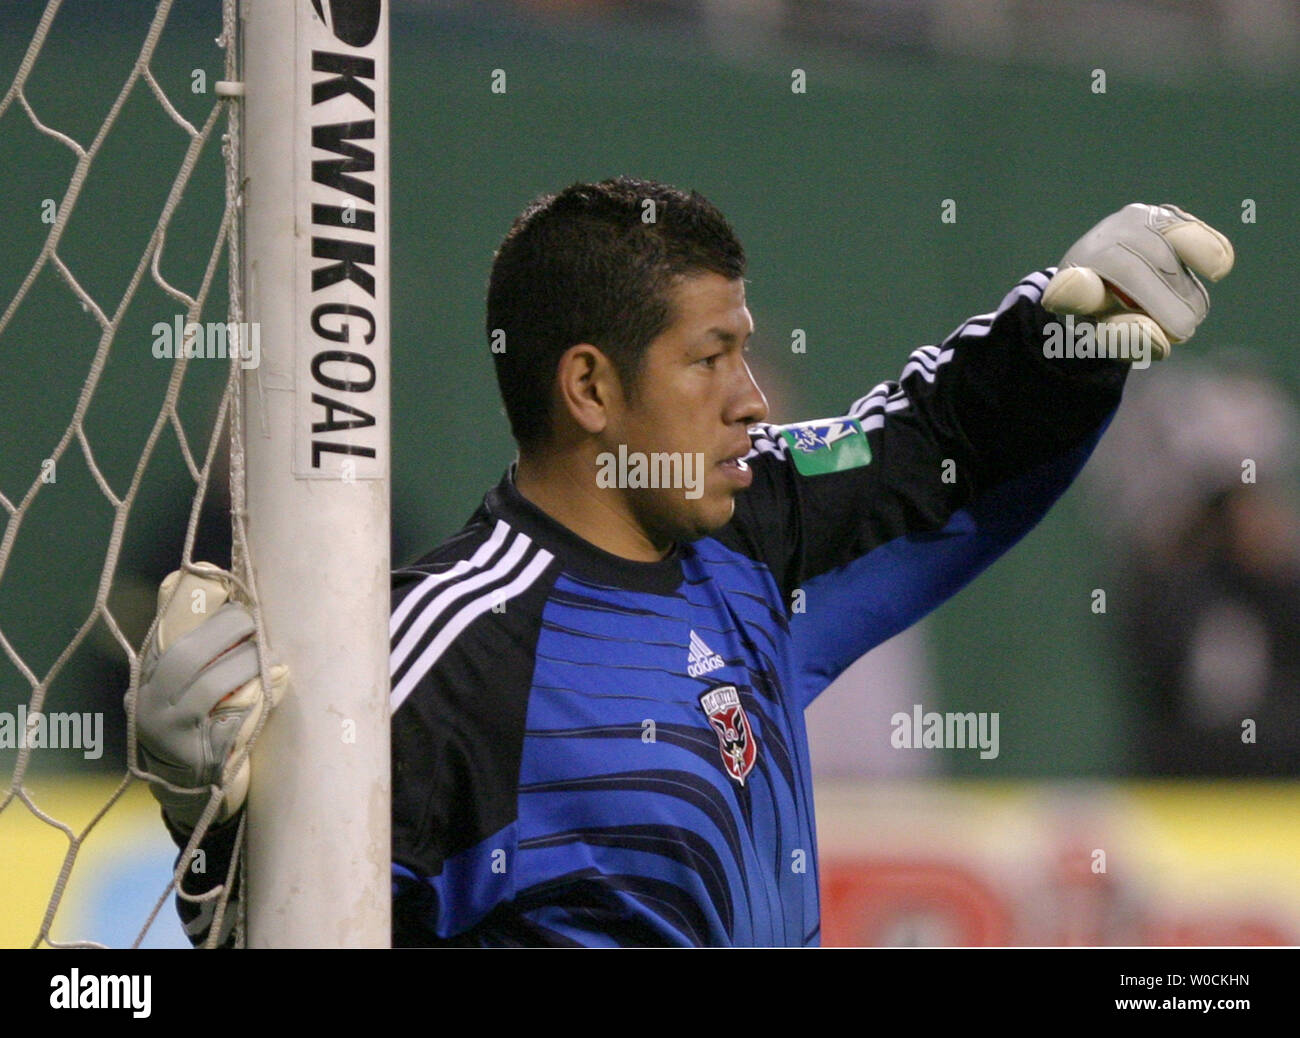 D.C. United goal keeper Nick Rimando gives directions to his defenders during their MLS match up against the England Revolution on April 23, 2005 at RFK Stadium in Washington, D.C. The Revolution beat the United 4-3. (UPI Photo/Kevin Dietsch) Stock Photo